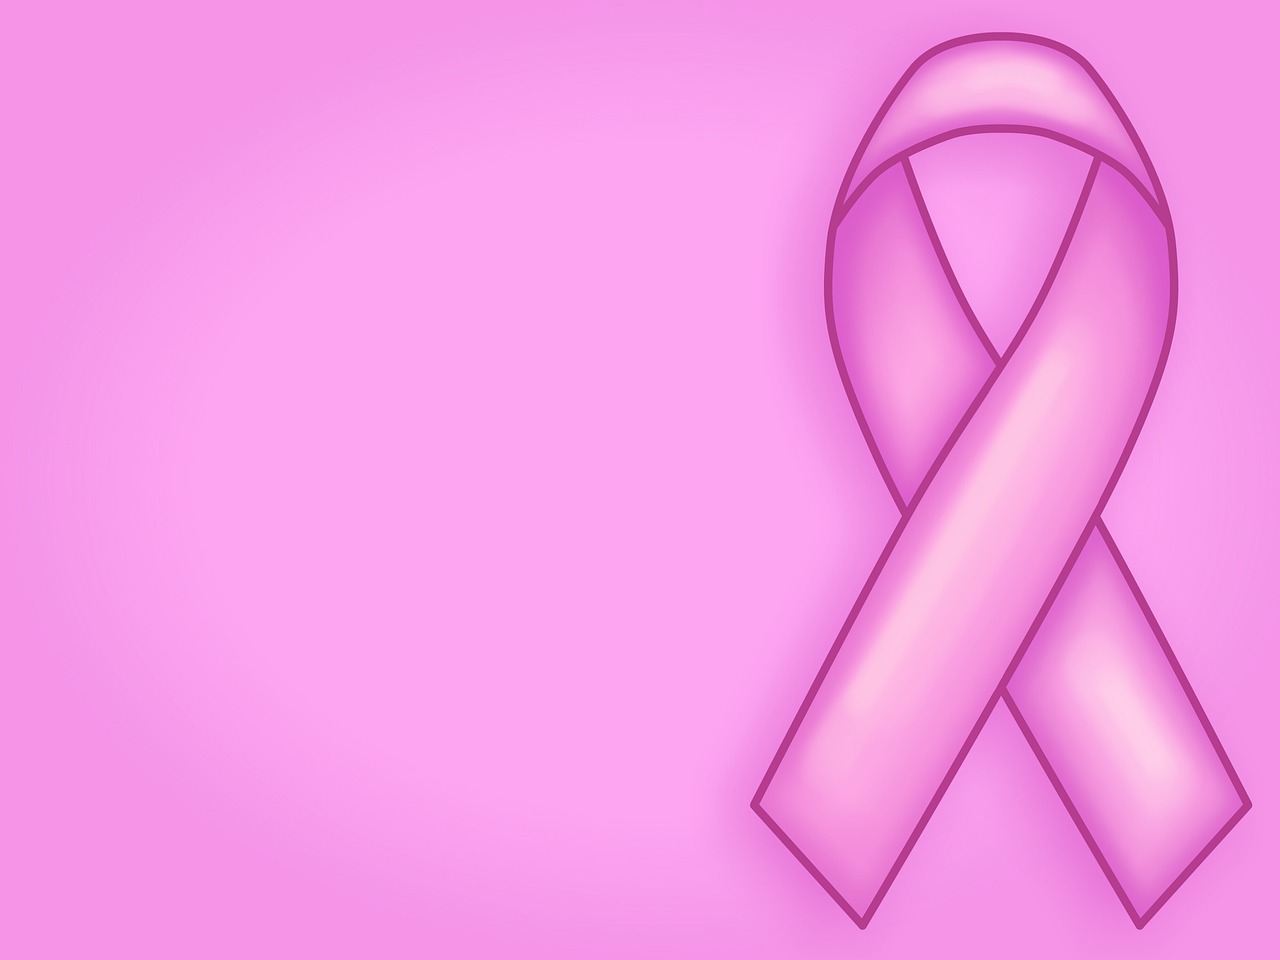 BREAST CANCER RES TR：<font color="red">低</font><font color="red">风险</font><font color="red">早期</font><font color="red">乳腺癌</font>，术后能不化疗吗？